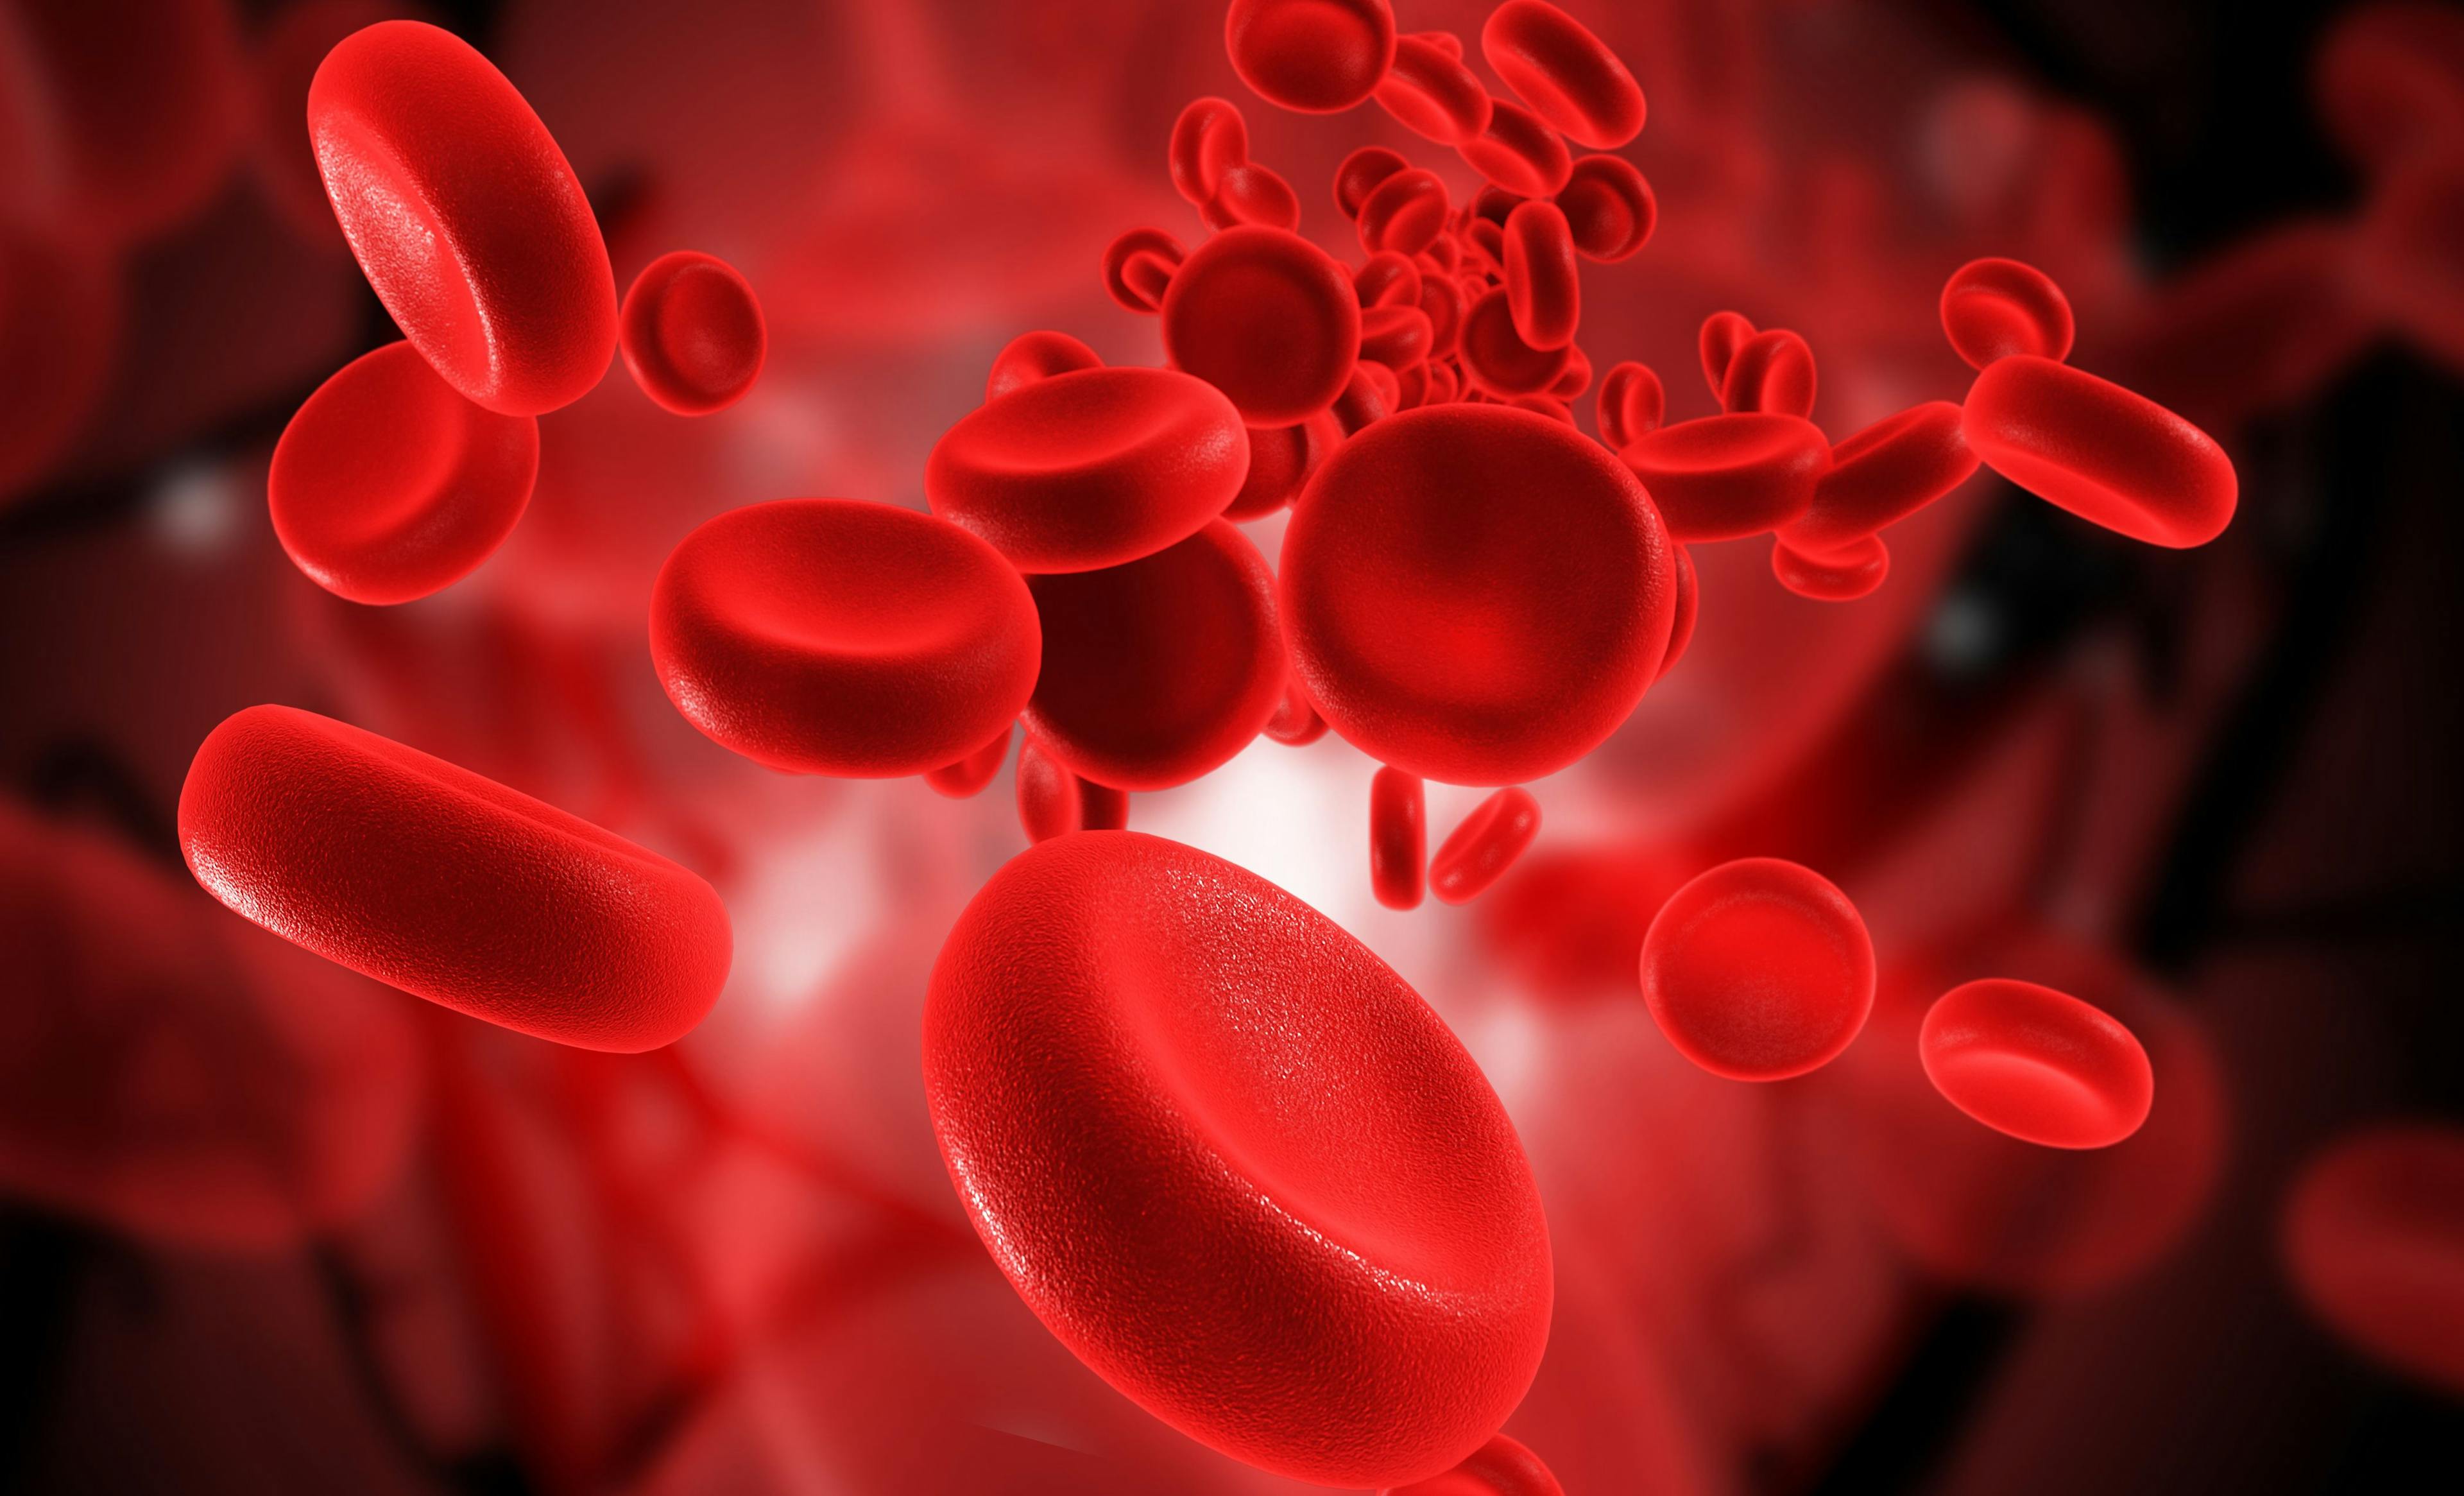 blood cells | Image Credit: abhijith3747 - www.stock.adobe.com